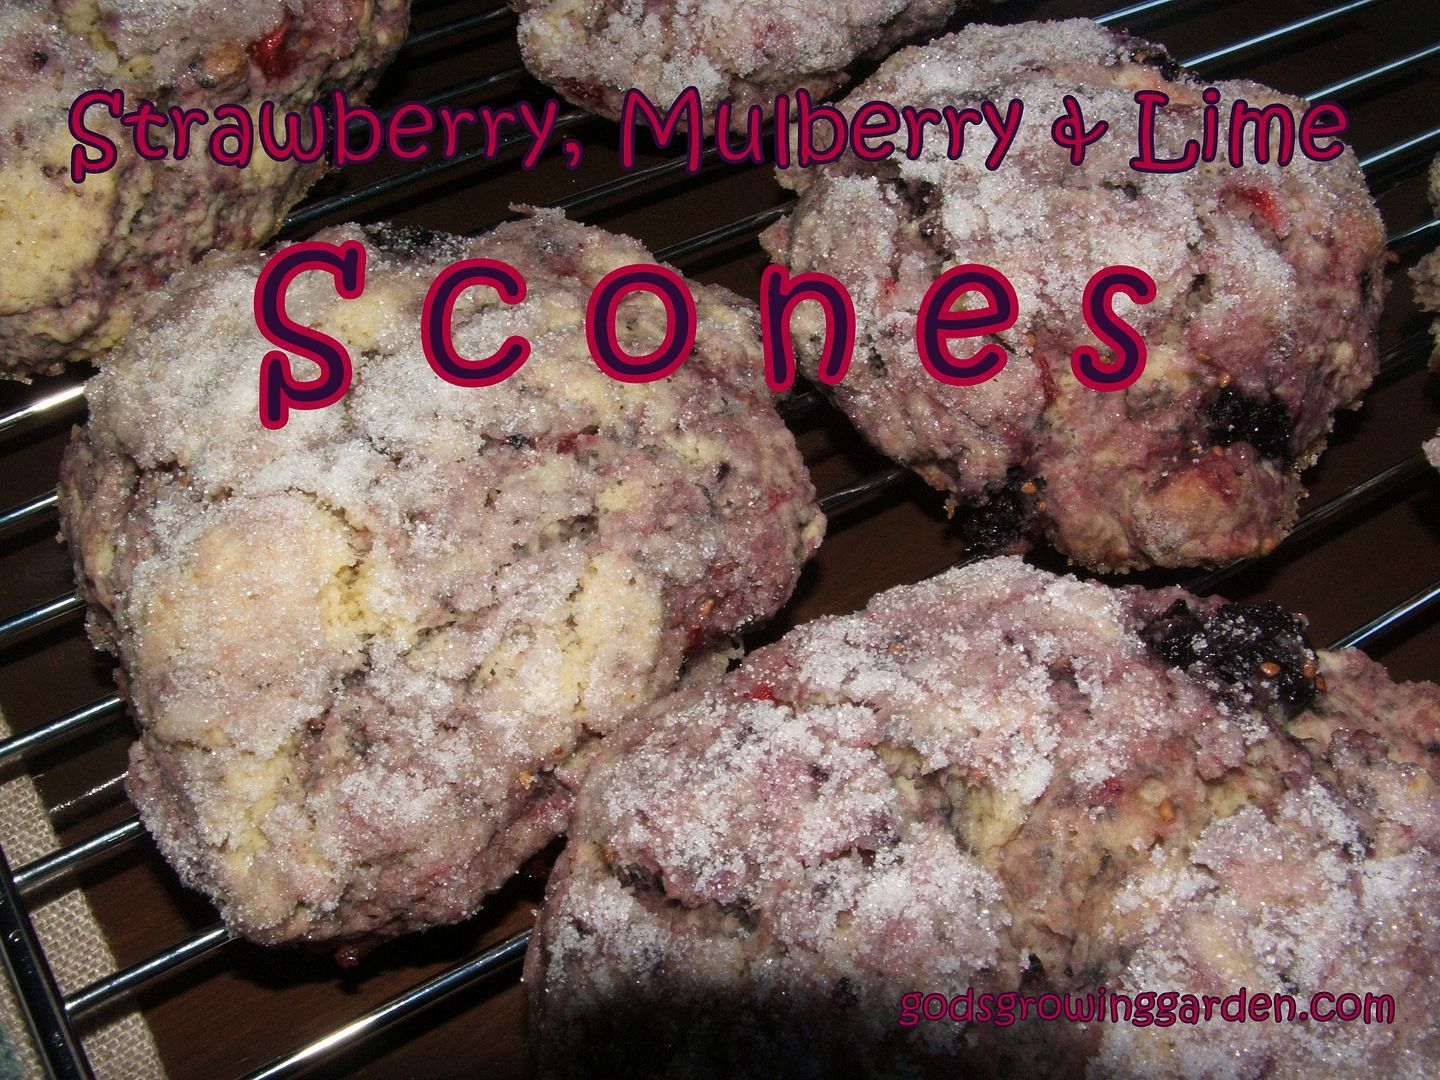 Mulberry Scones by Angie Ouellette-Tower for godsgrowinggarden.com photo 010_zpsb02e97b1.jpg